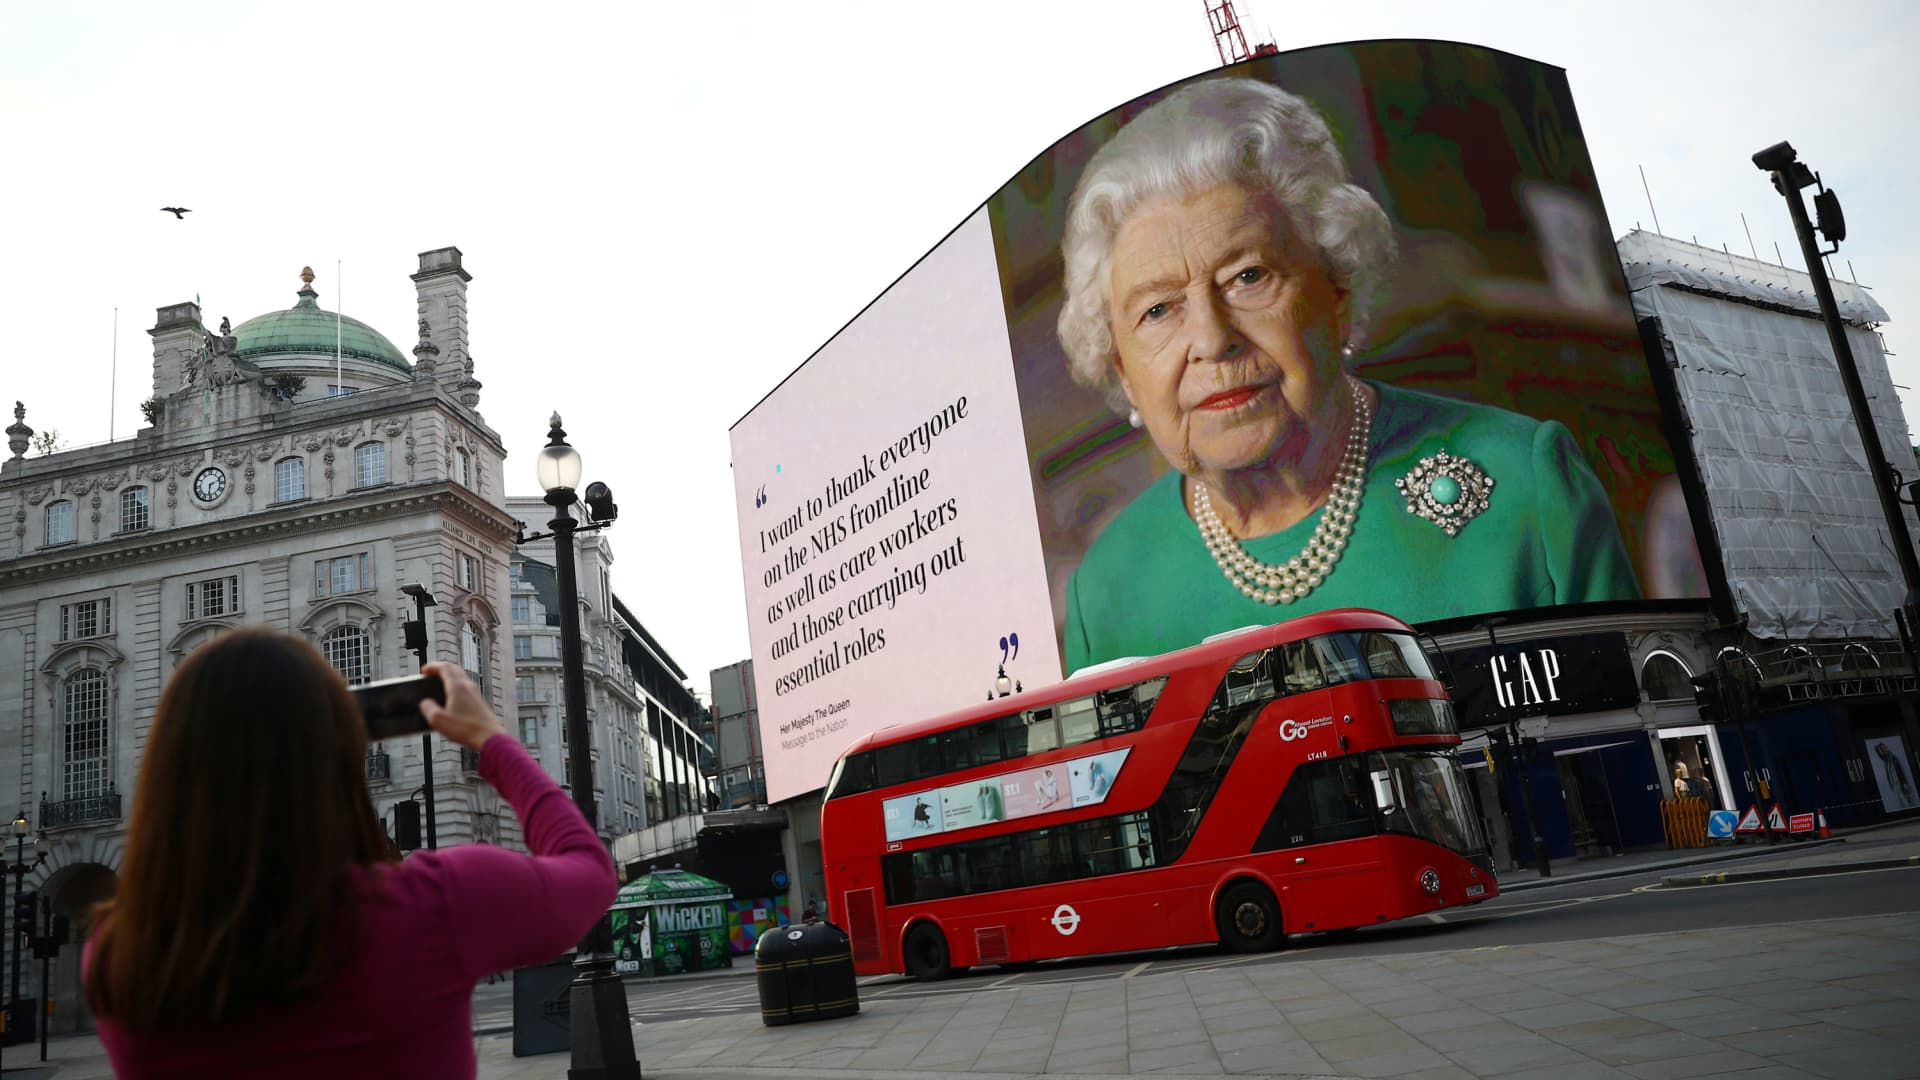 A message from Britain's Queen Elizabeth II is displayed on a screen in Piccadilly Circus, during the early days of the Covid pandemic, London, Britain, April 8, 2020.